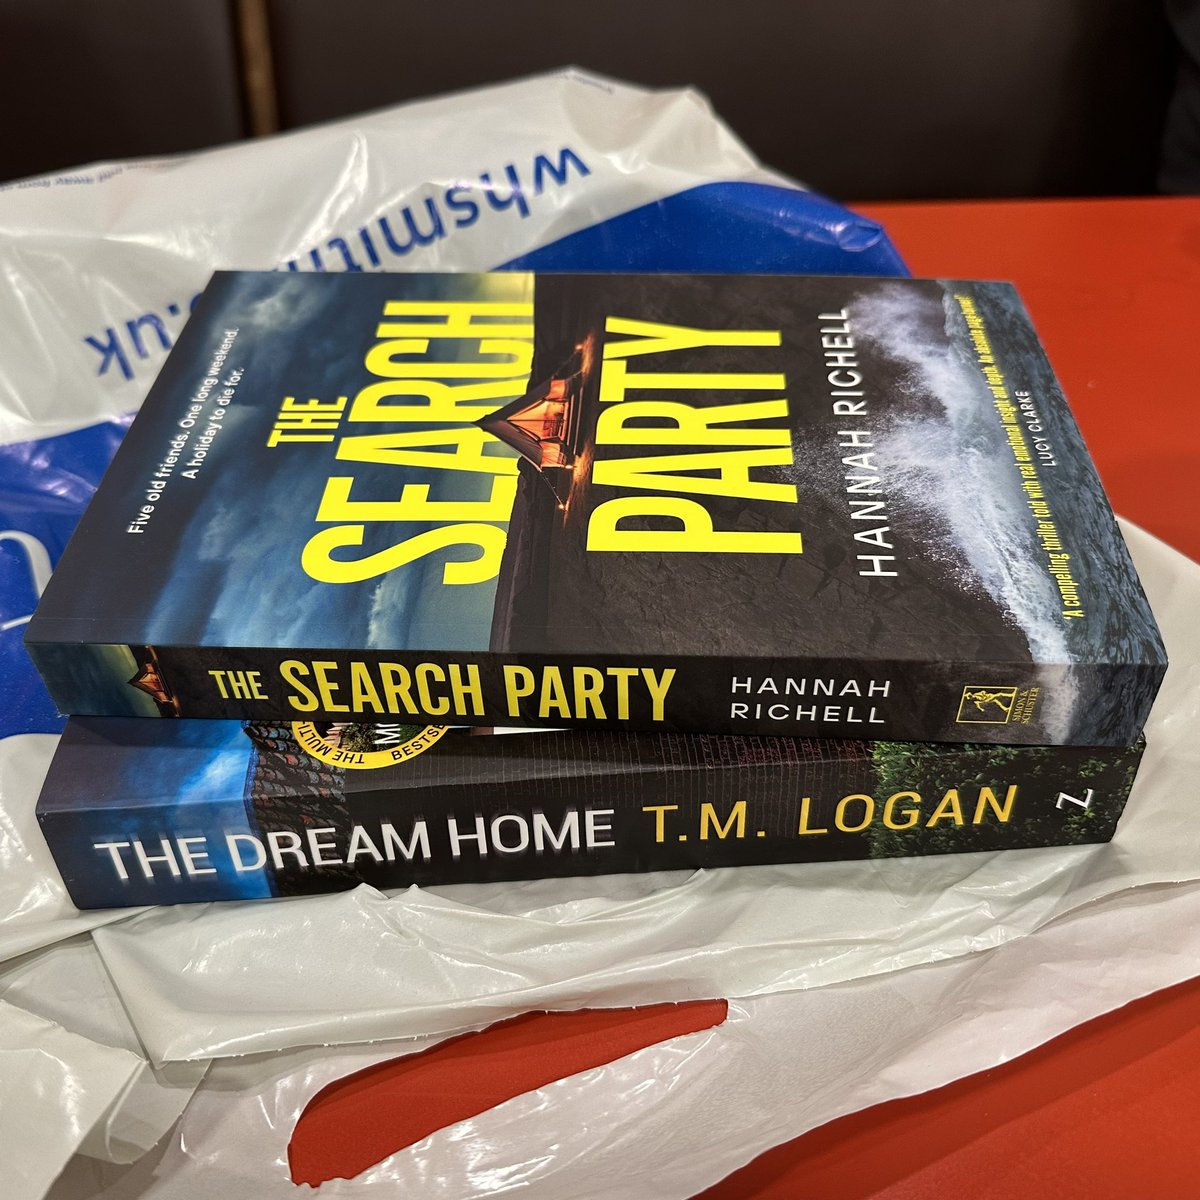 When you know you’re already got too many books to read but you can’t resist airport book shopping! Oops!

Very happy to have picked up my early birthday present copy of #TheDreamHome as well as #TheSearchParty which sounds very intriguing📚

#BookTwitter #AirportBooks #BookLove